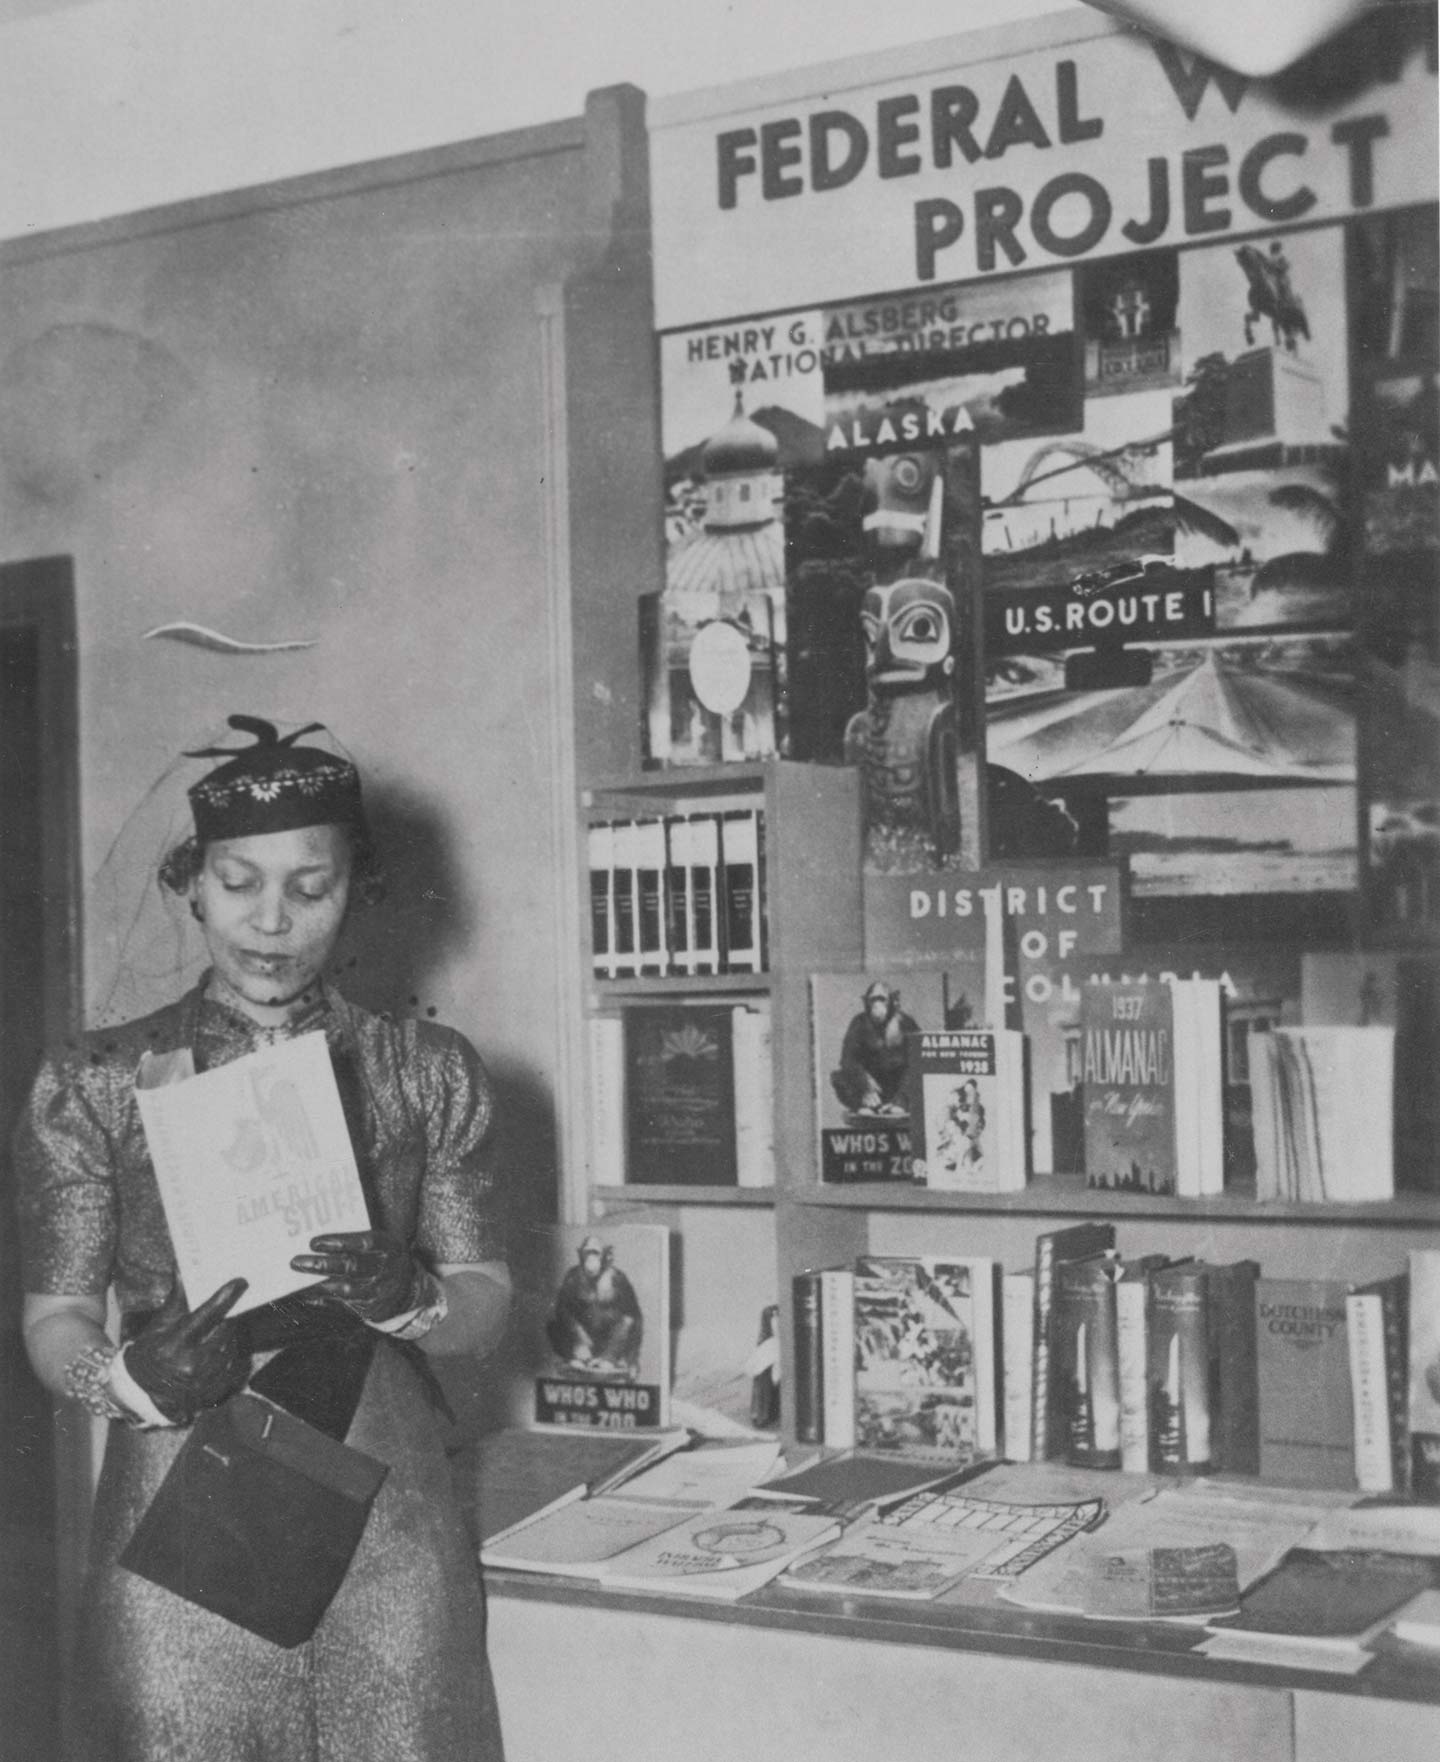 Zora Neale Hurston examining a copy of American Stuff at the New York Times Book Fair in fall 1937